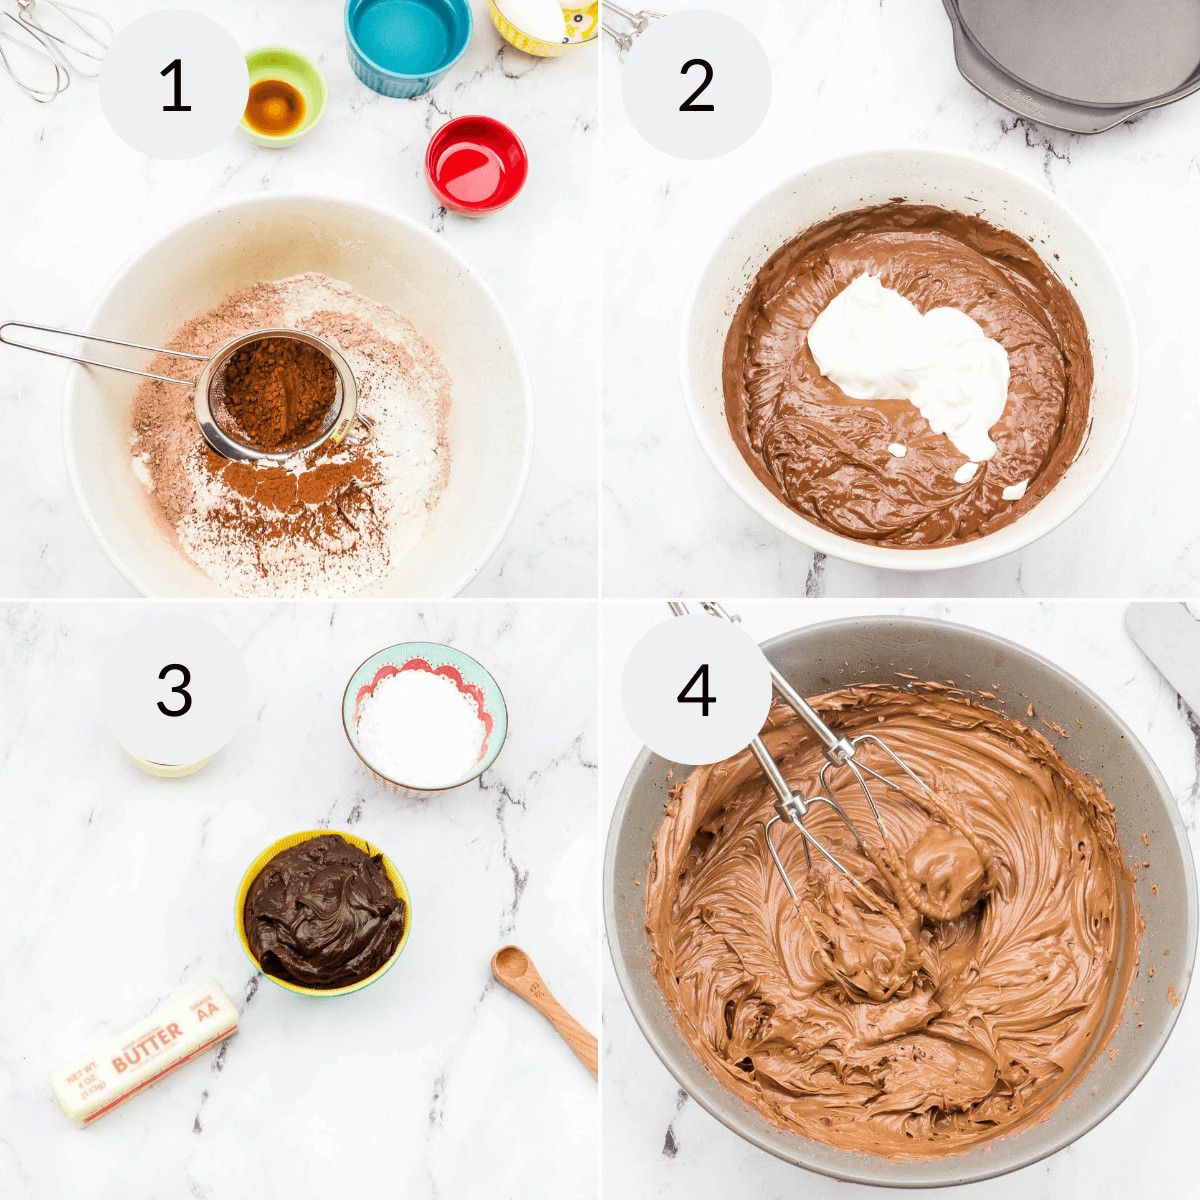 Mixing the cake mix ingredients together.